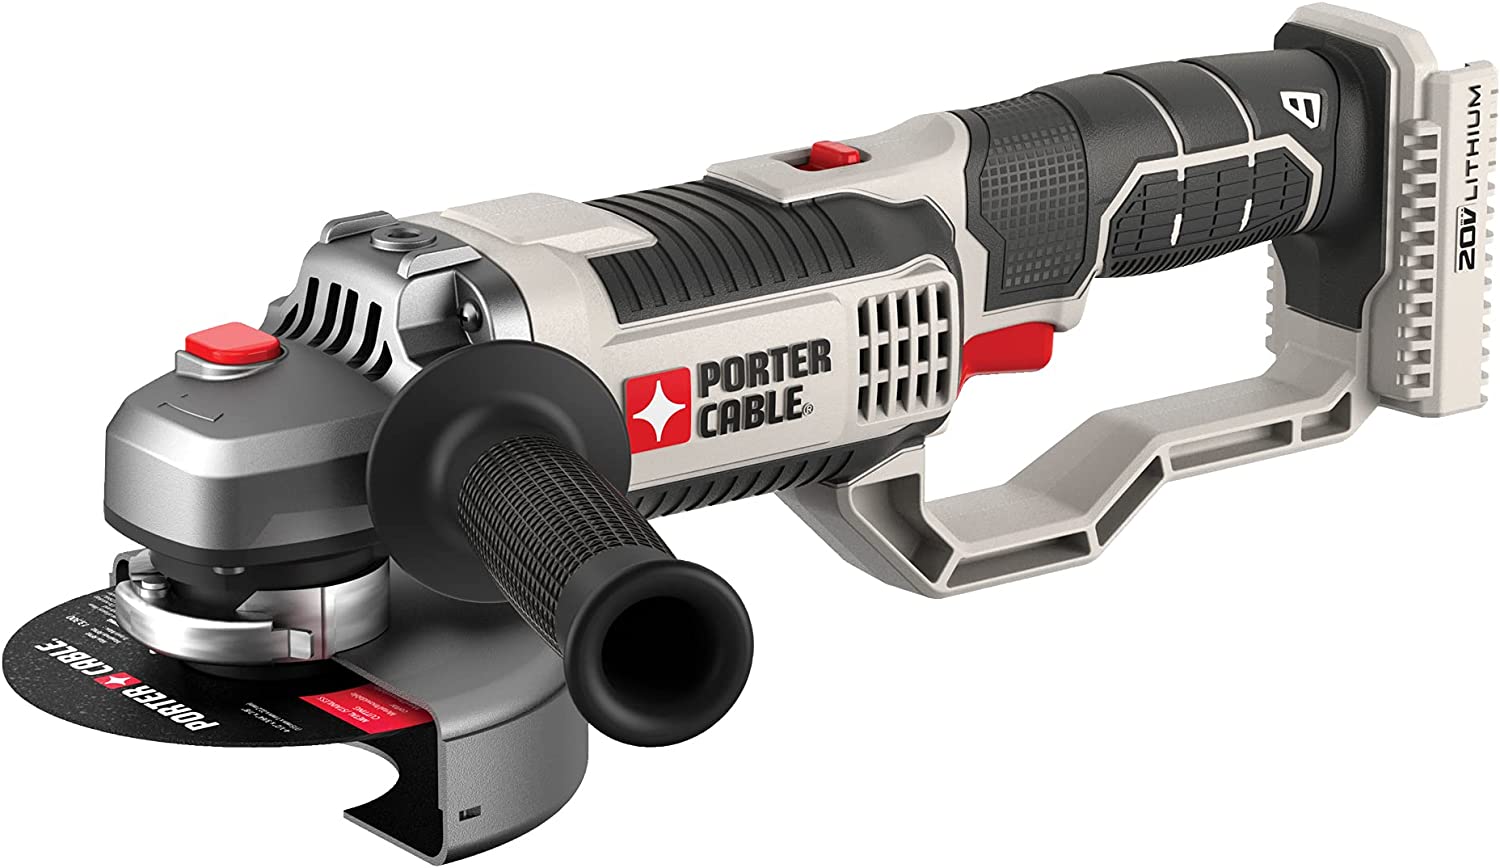 PORTER-CABLE 20V MAX* Angle Grinder Tool, 4-1/2-Inch, Tool Only (PCC761B)